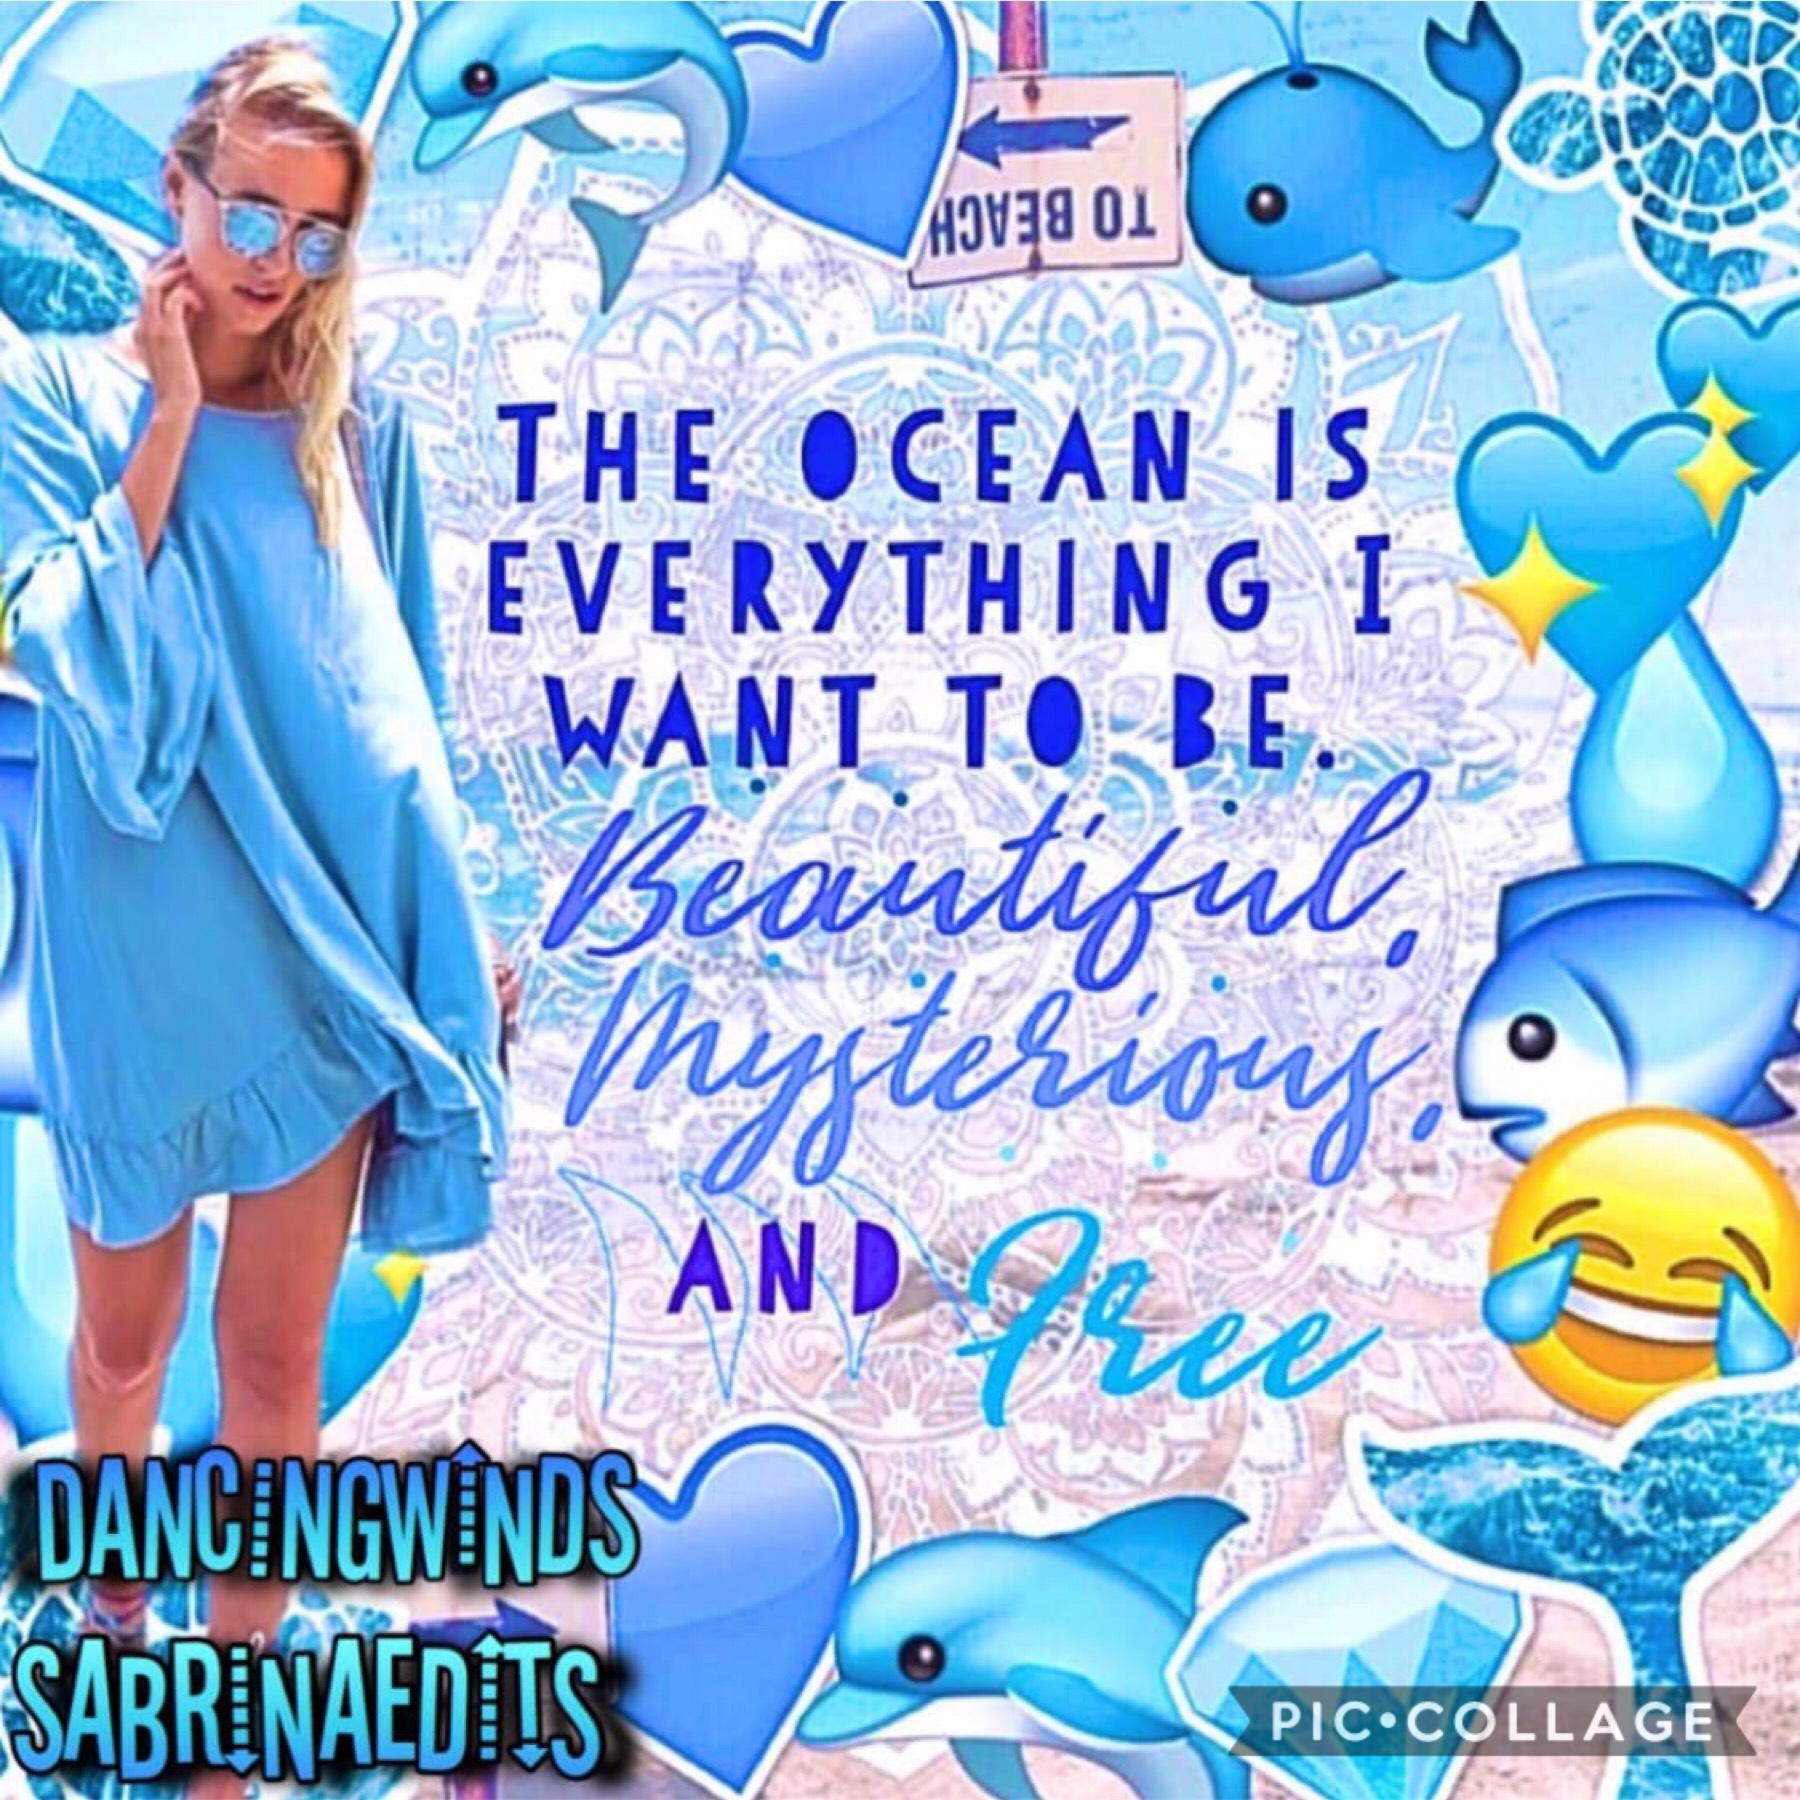 💙 collab with the amazing... 💙

✨SabrinaEdits✨
she is so amazing and great to work with. i places third on her extras account games ♥️ she did beautiful background and i did the bad text 😂
caption continued in comments 🥰